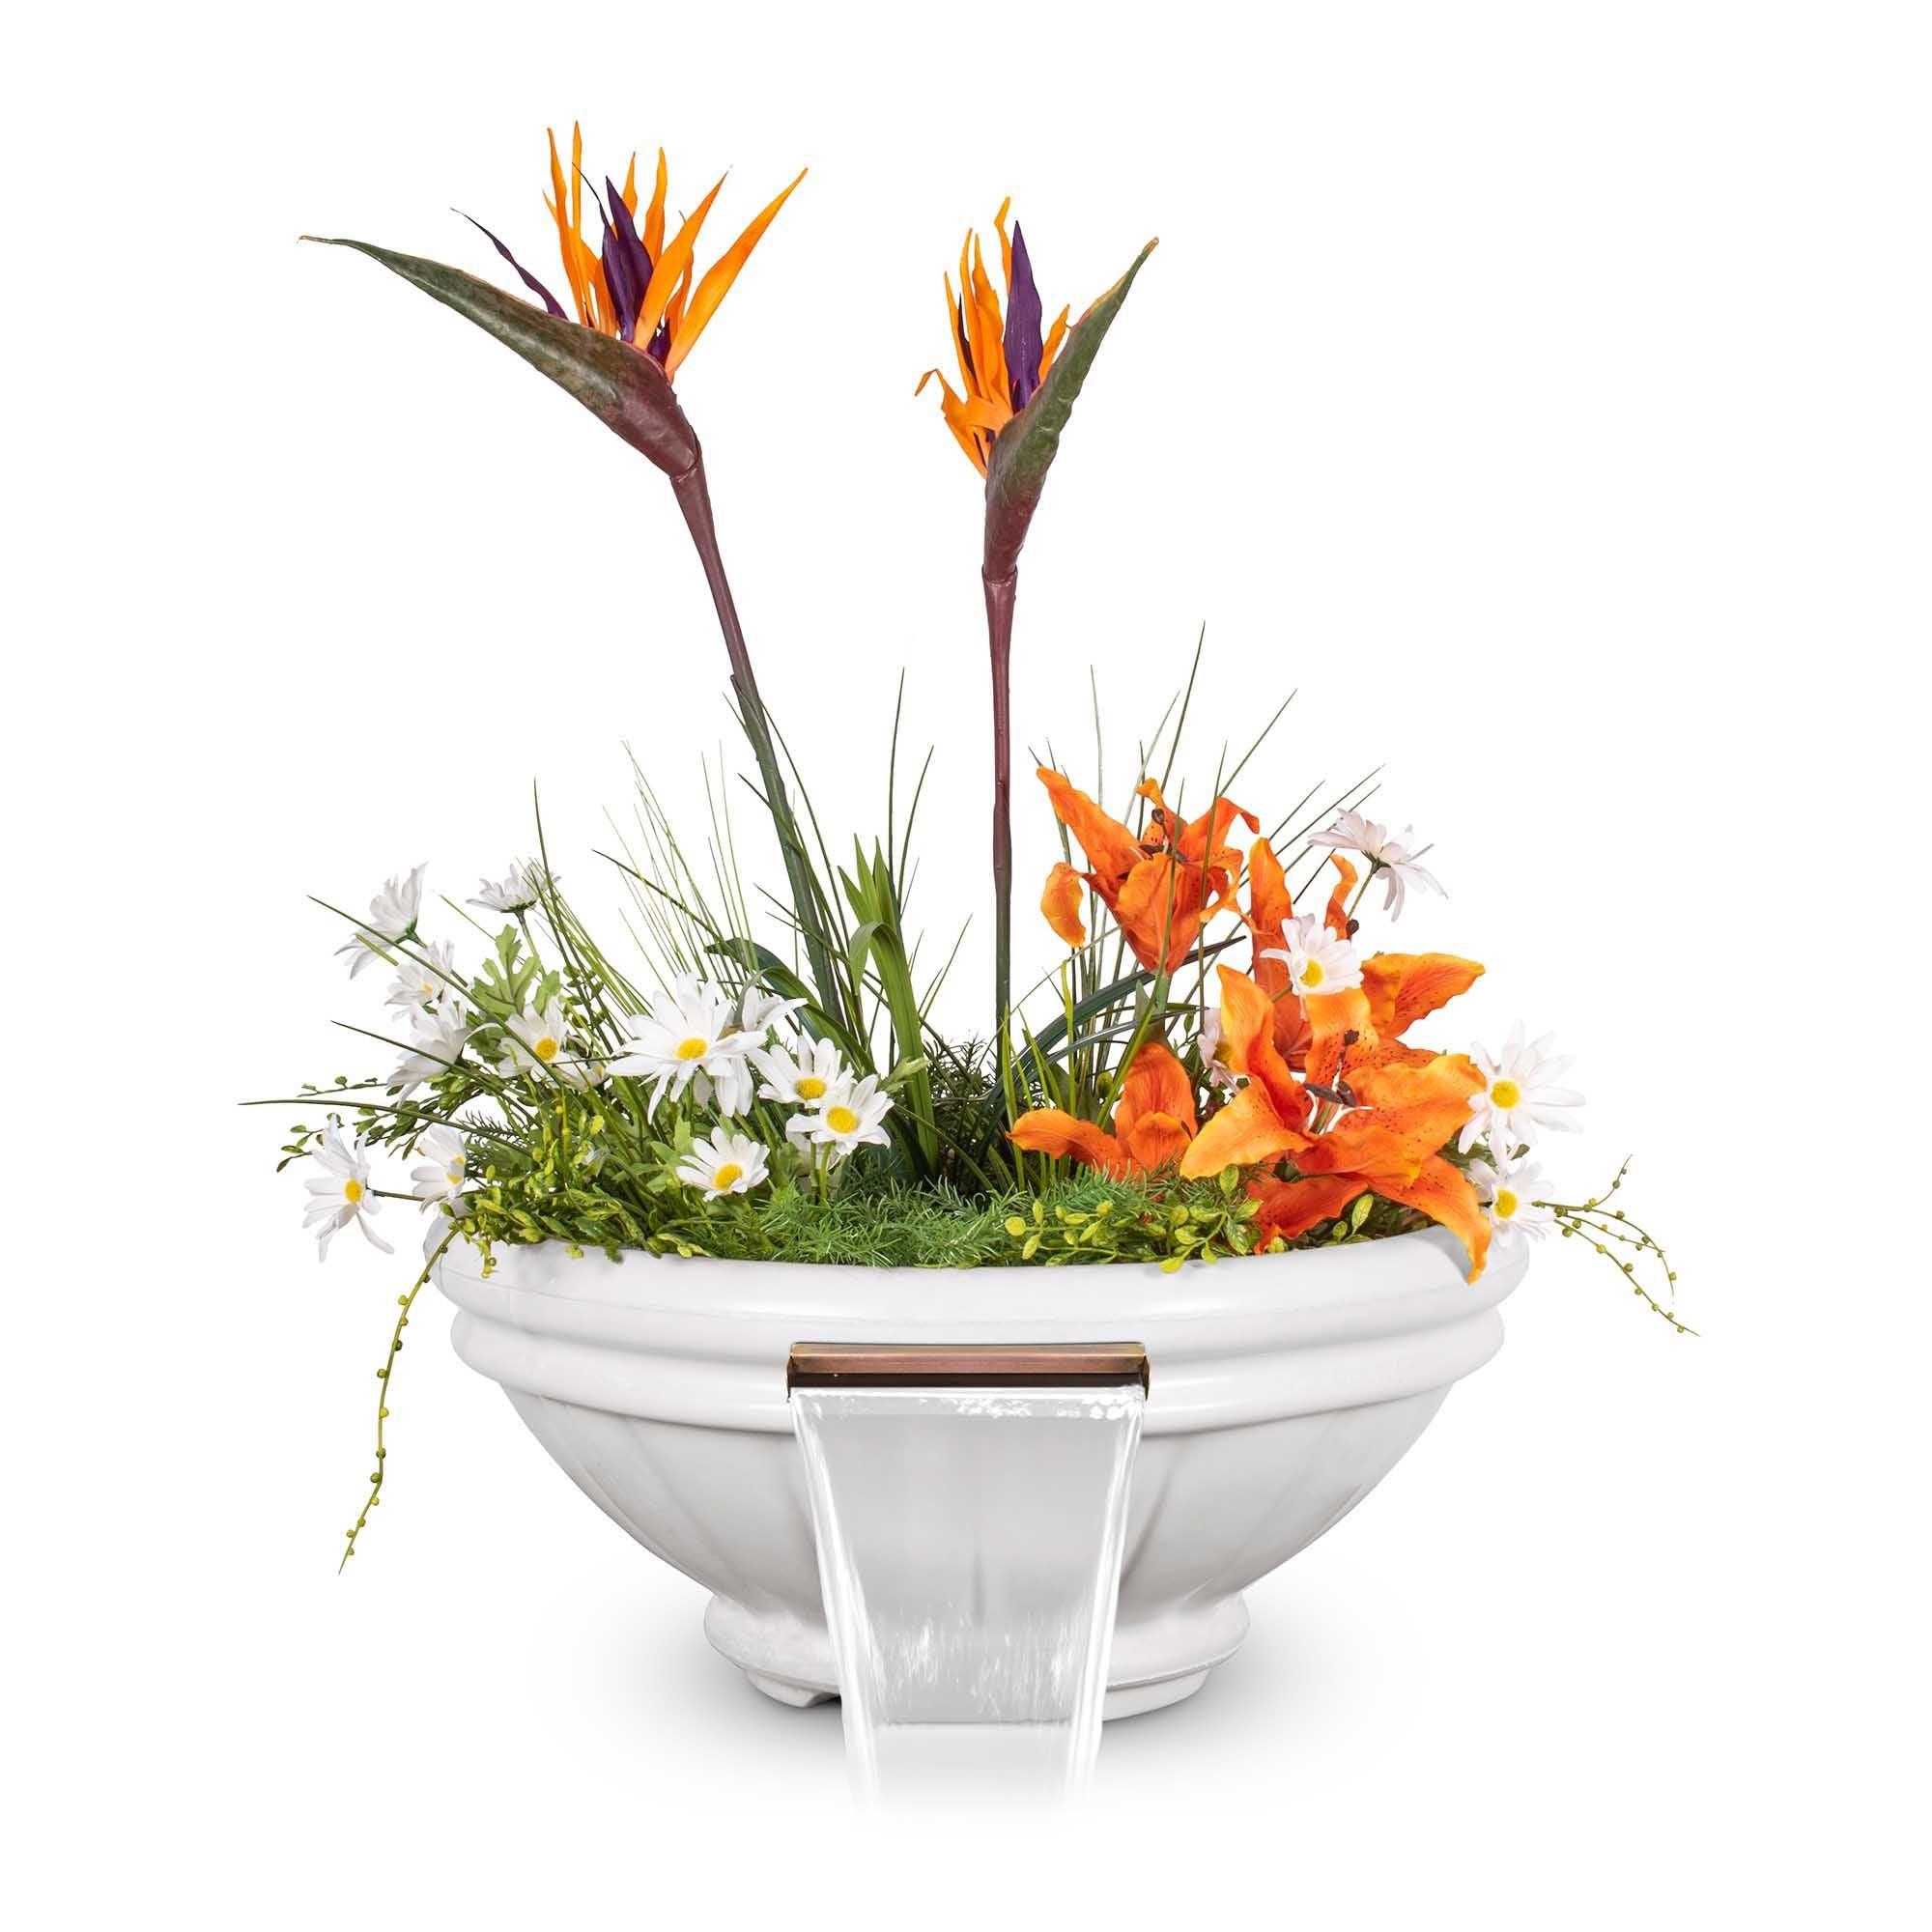 The Outdoor Plus Roma Planter and Water Bowl - Concrete